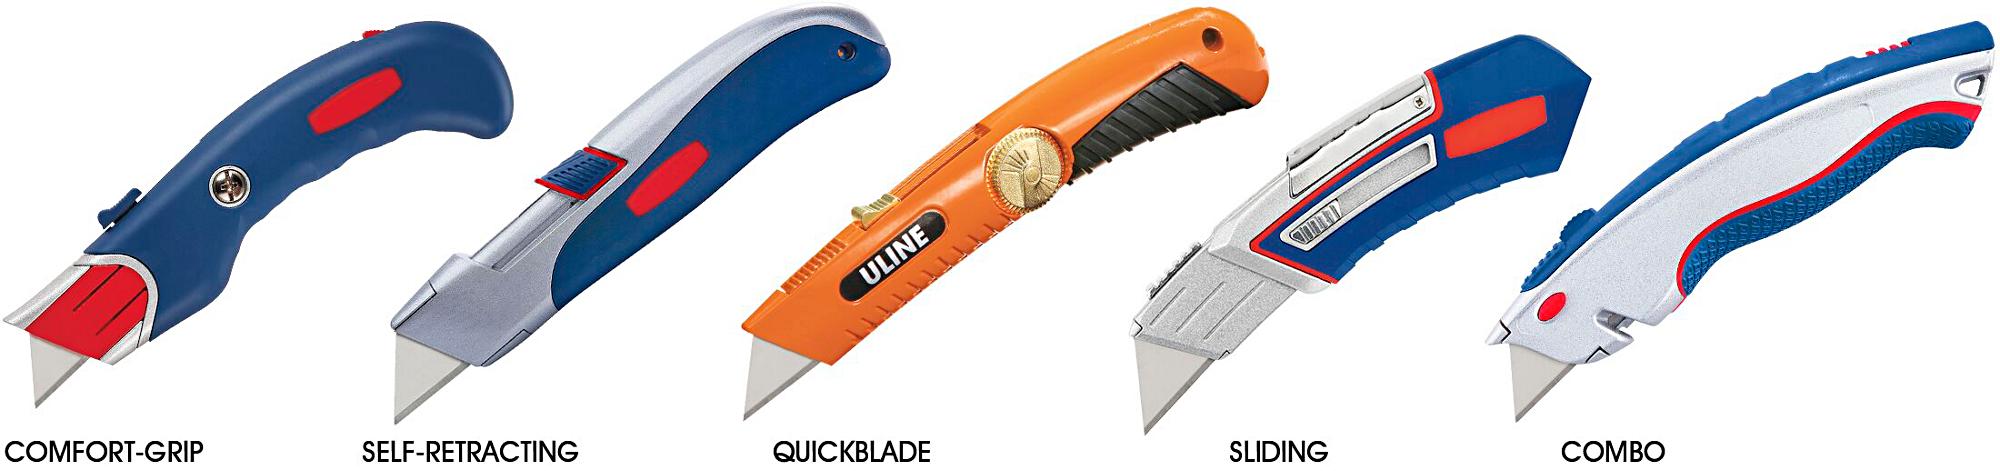 Auto-Retractable Safety Knives